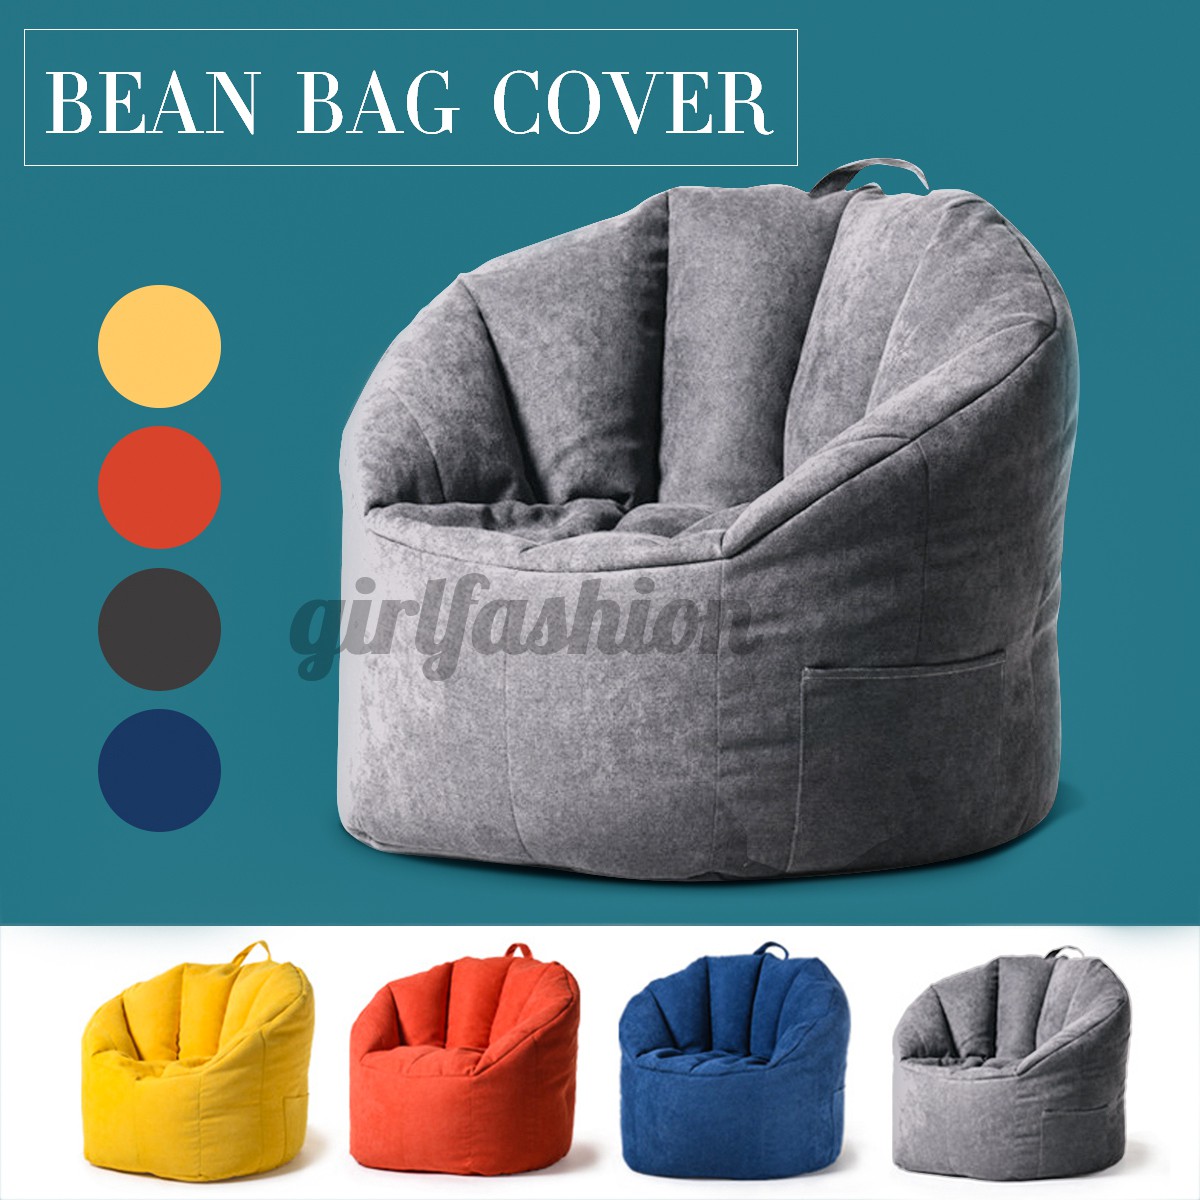 Yuppielife Adult Large Bean Bag Chair Sofa Cover Couch Cover Indoor Home Lazy Lounger Shopee Indonesia